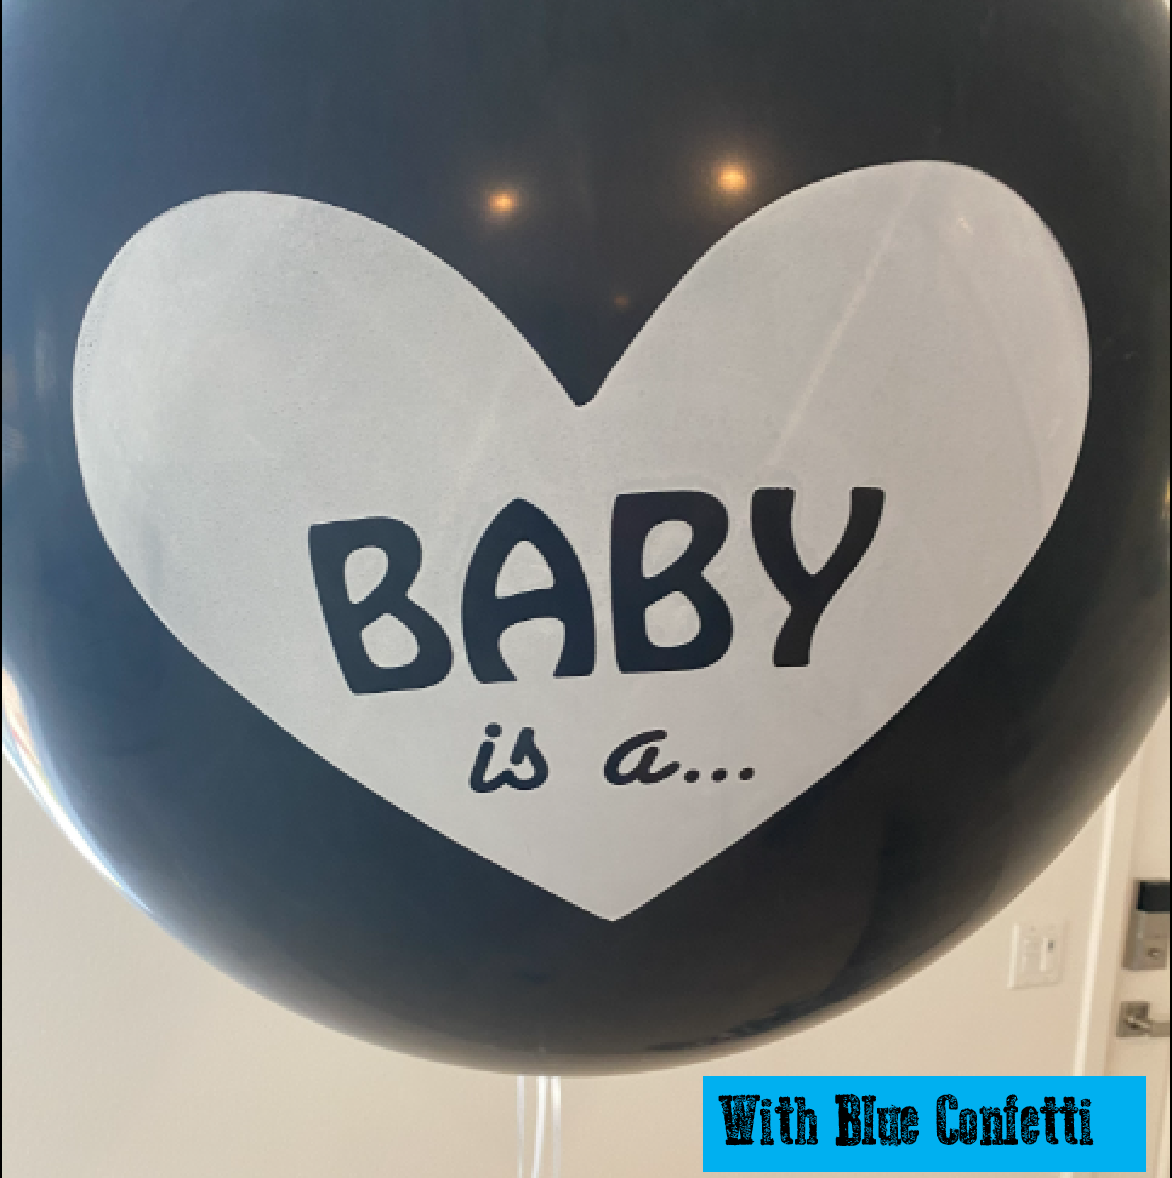 Party Decoration Balloon - Baby Gender Reveal Balloon - Blue Confetti